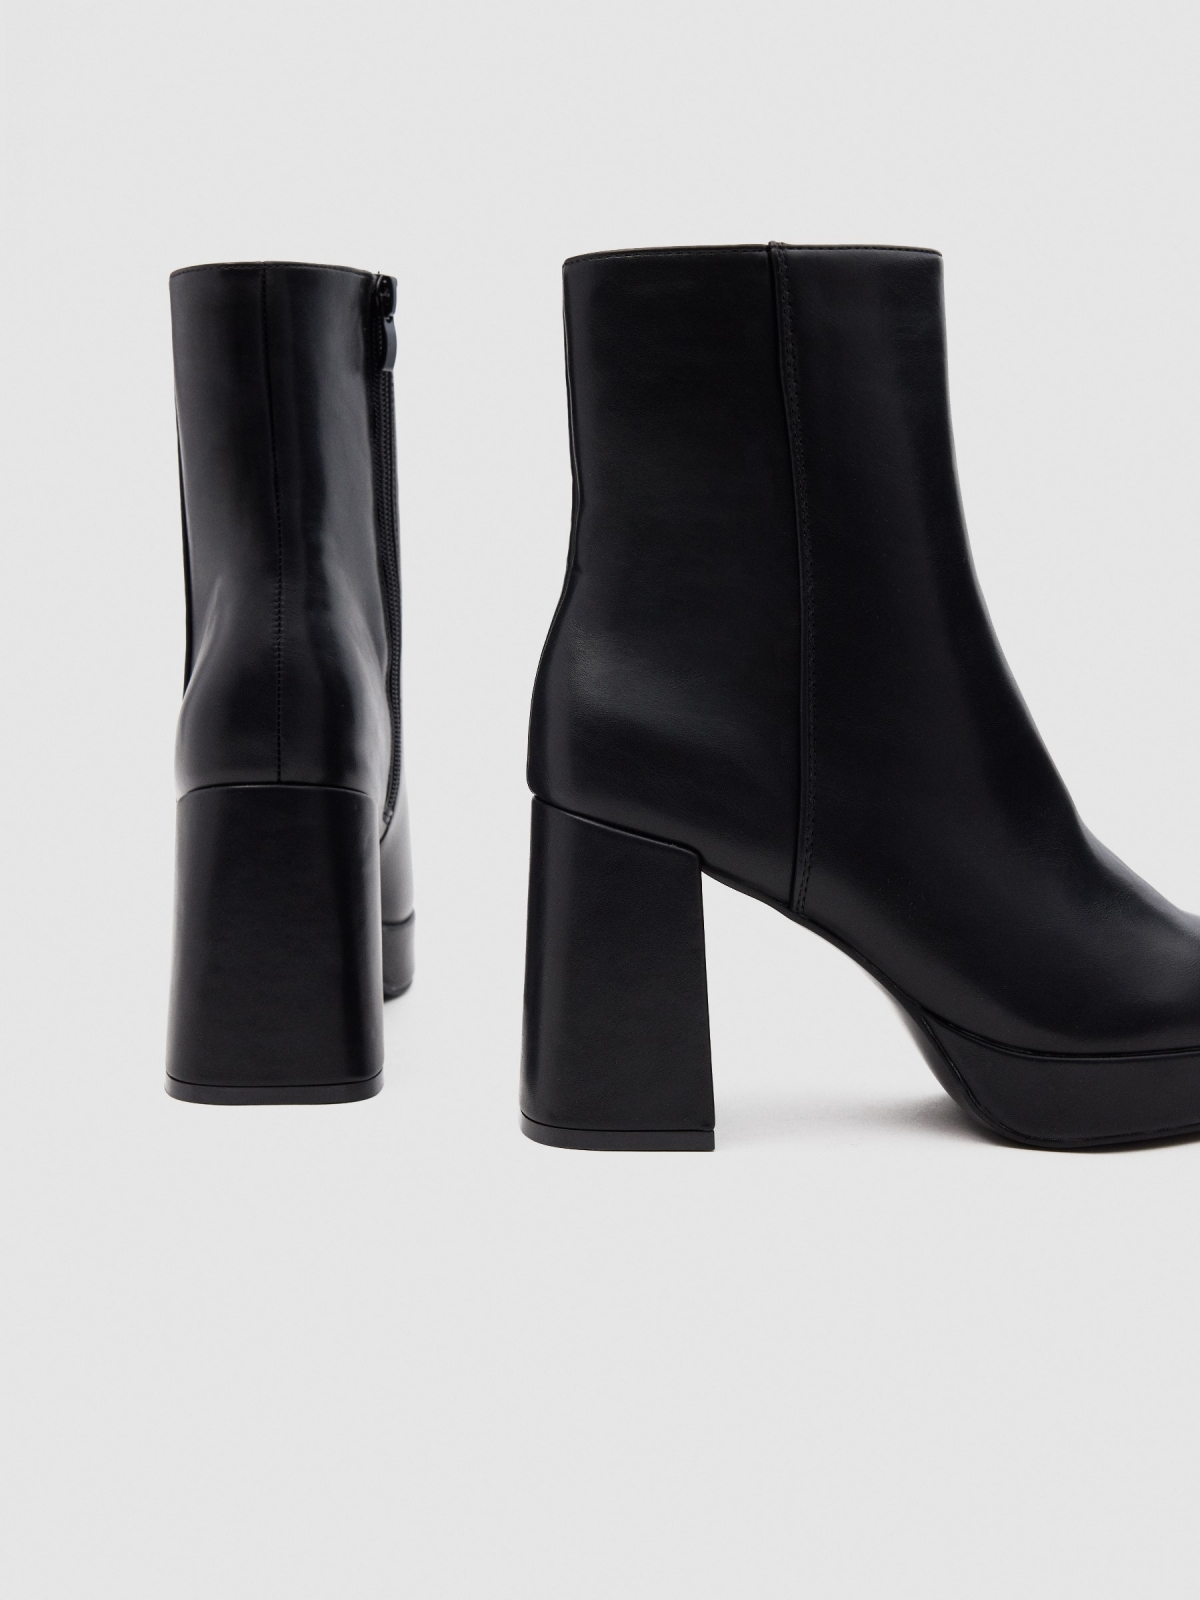 Square toe ankle boots black detail view